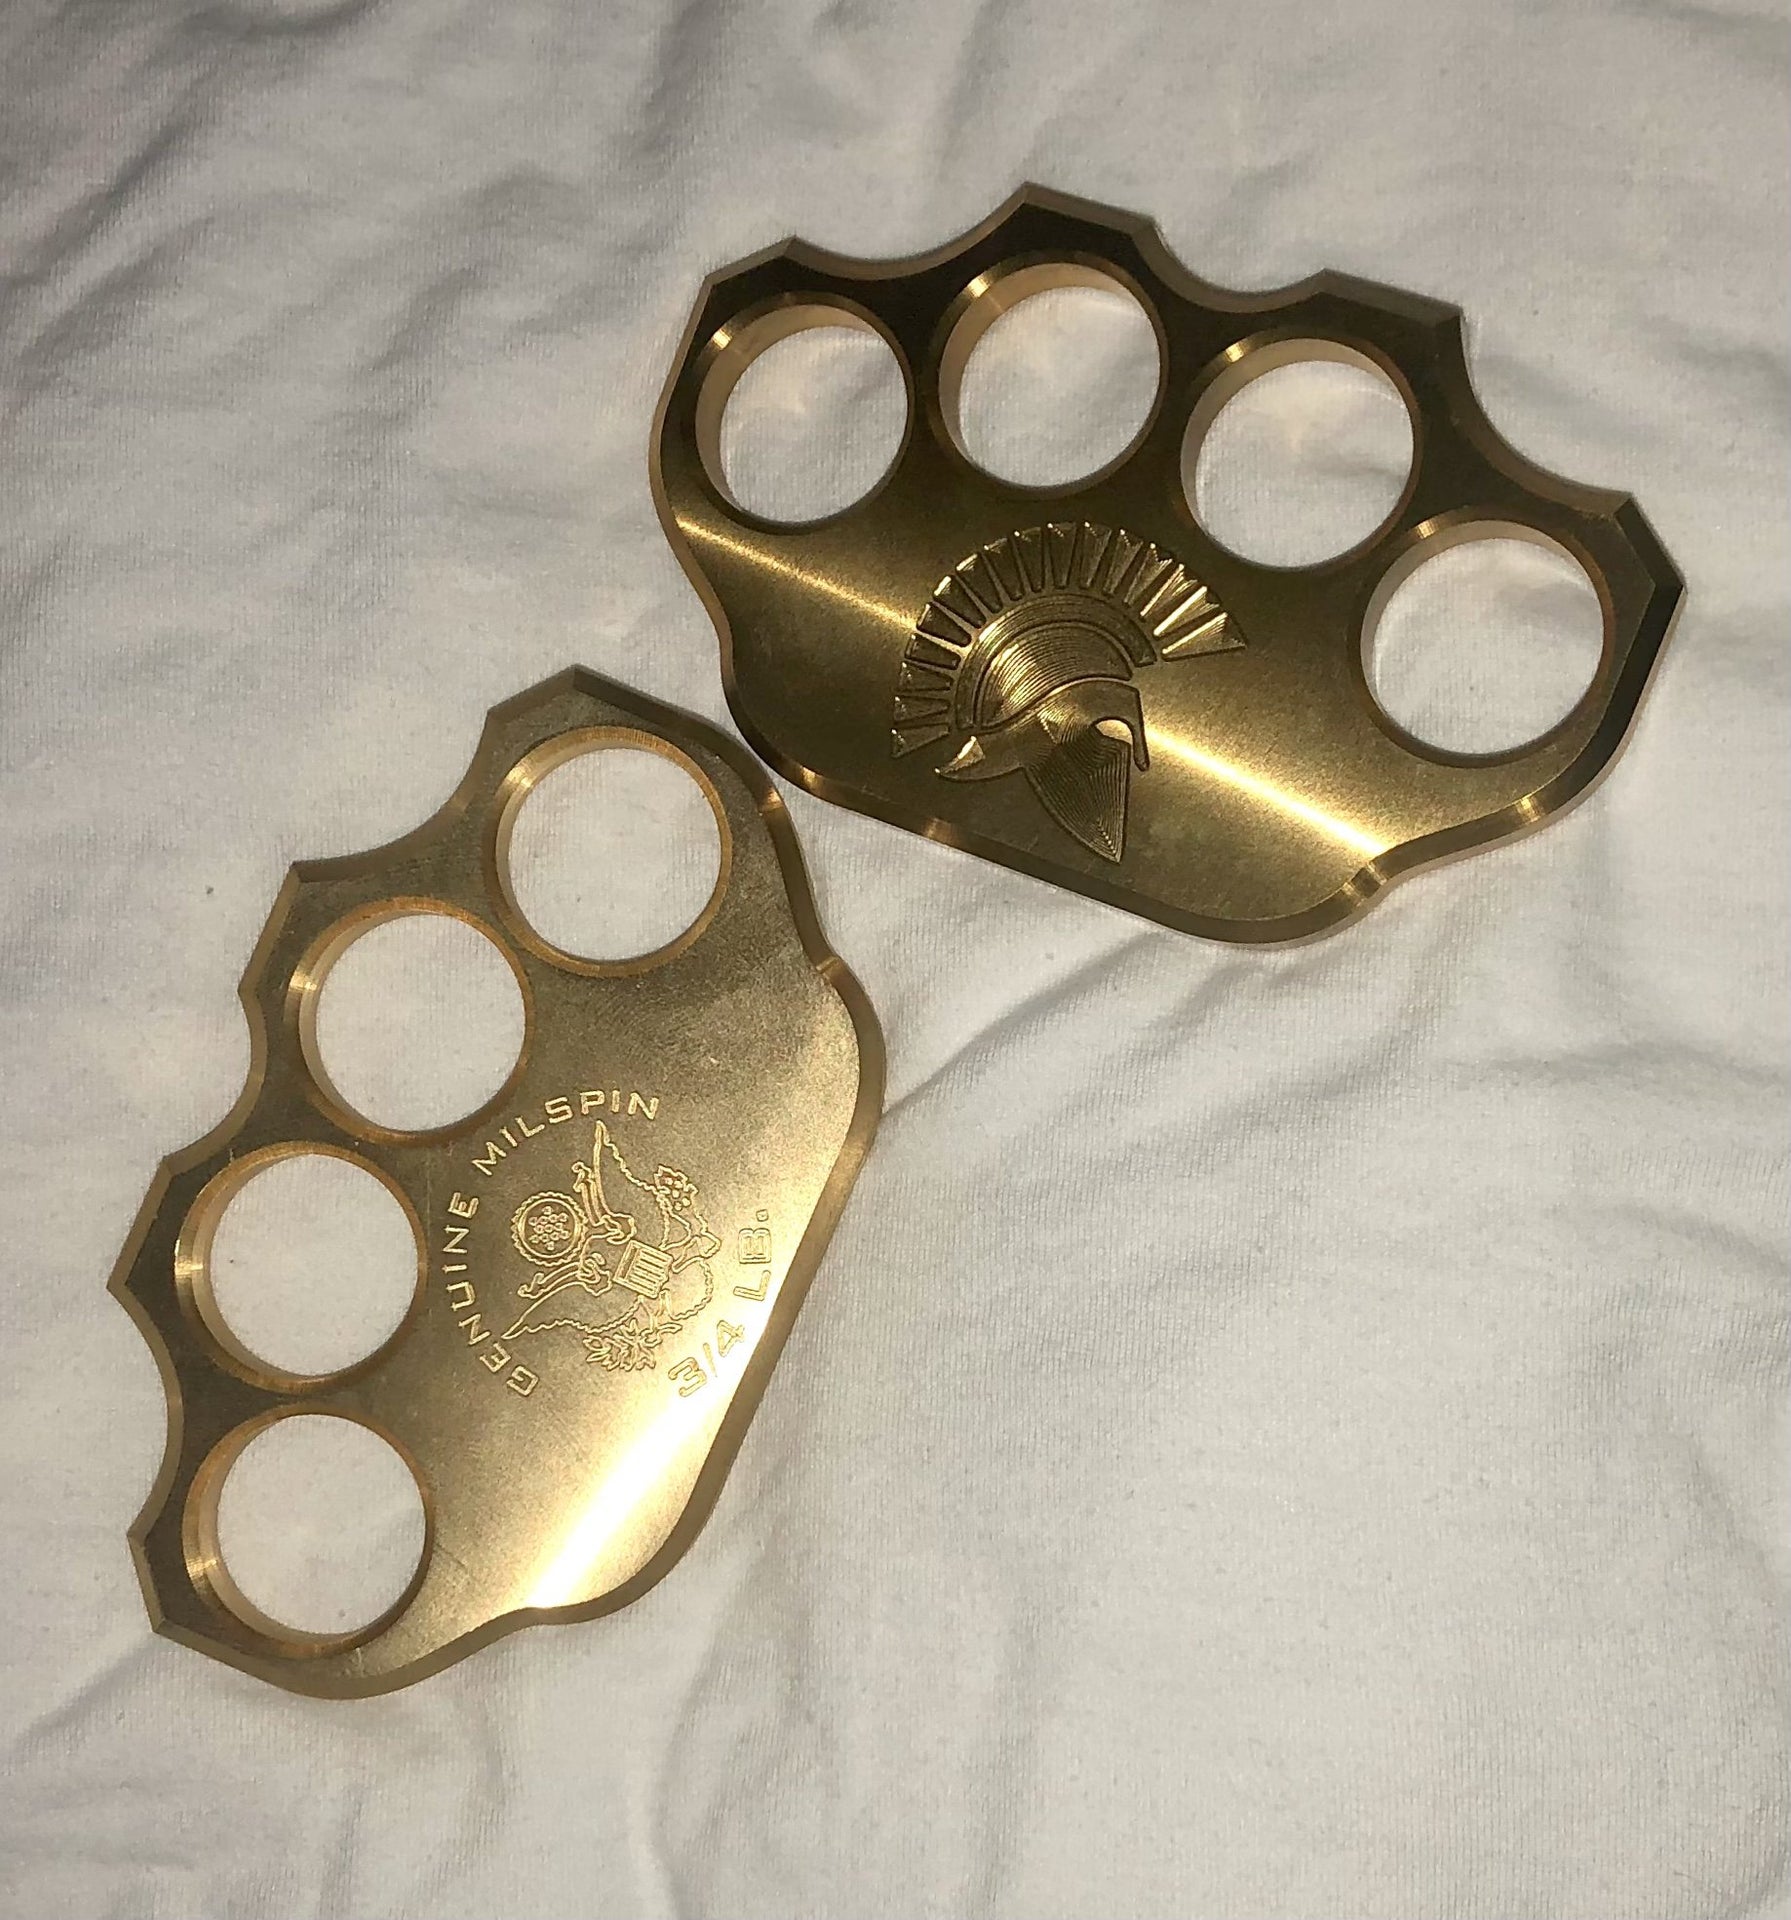 Introduction to Monkey Knuckles and Why It Was Started? – Monkey